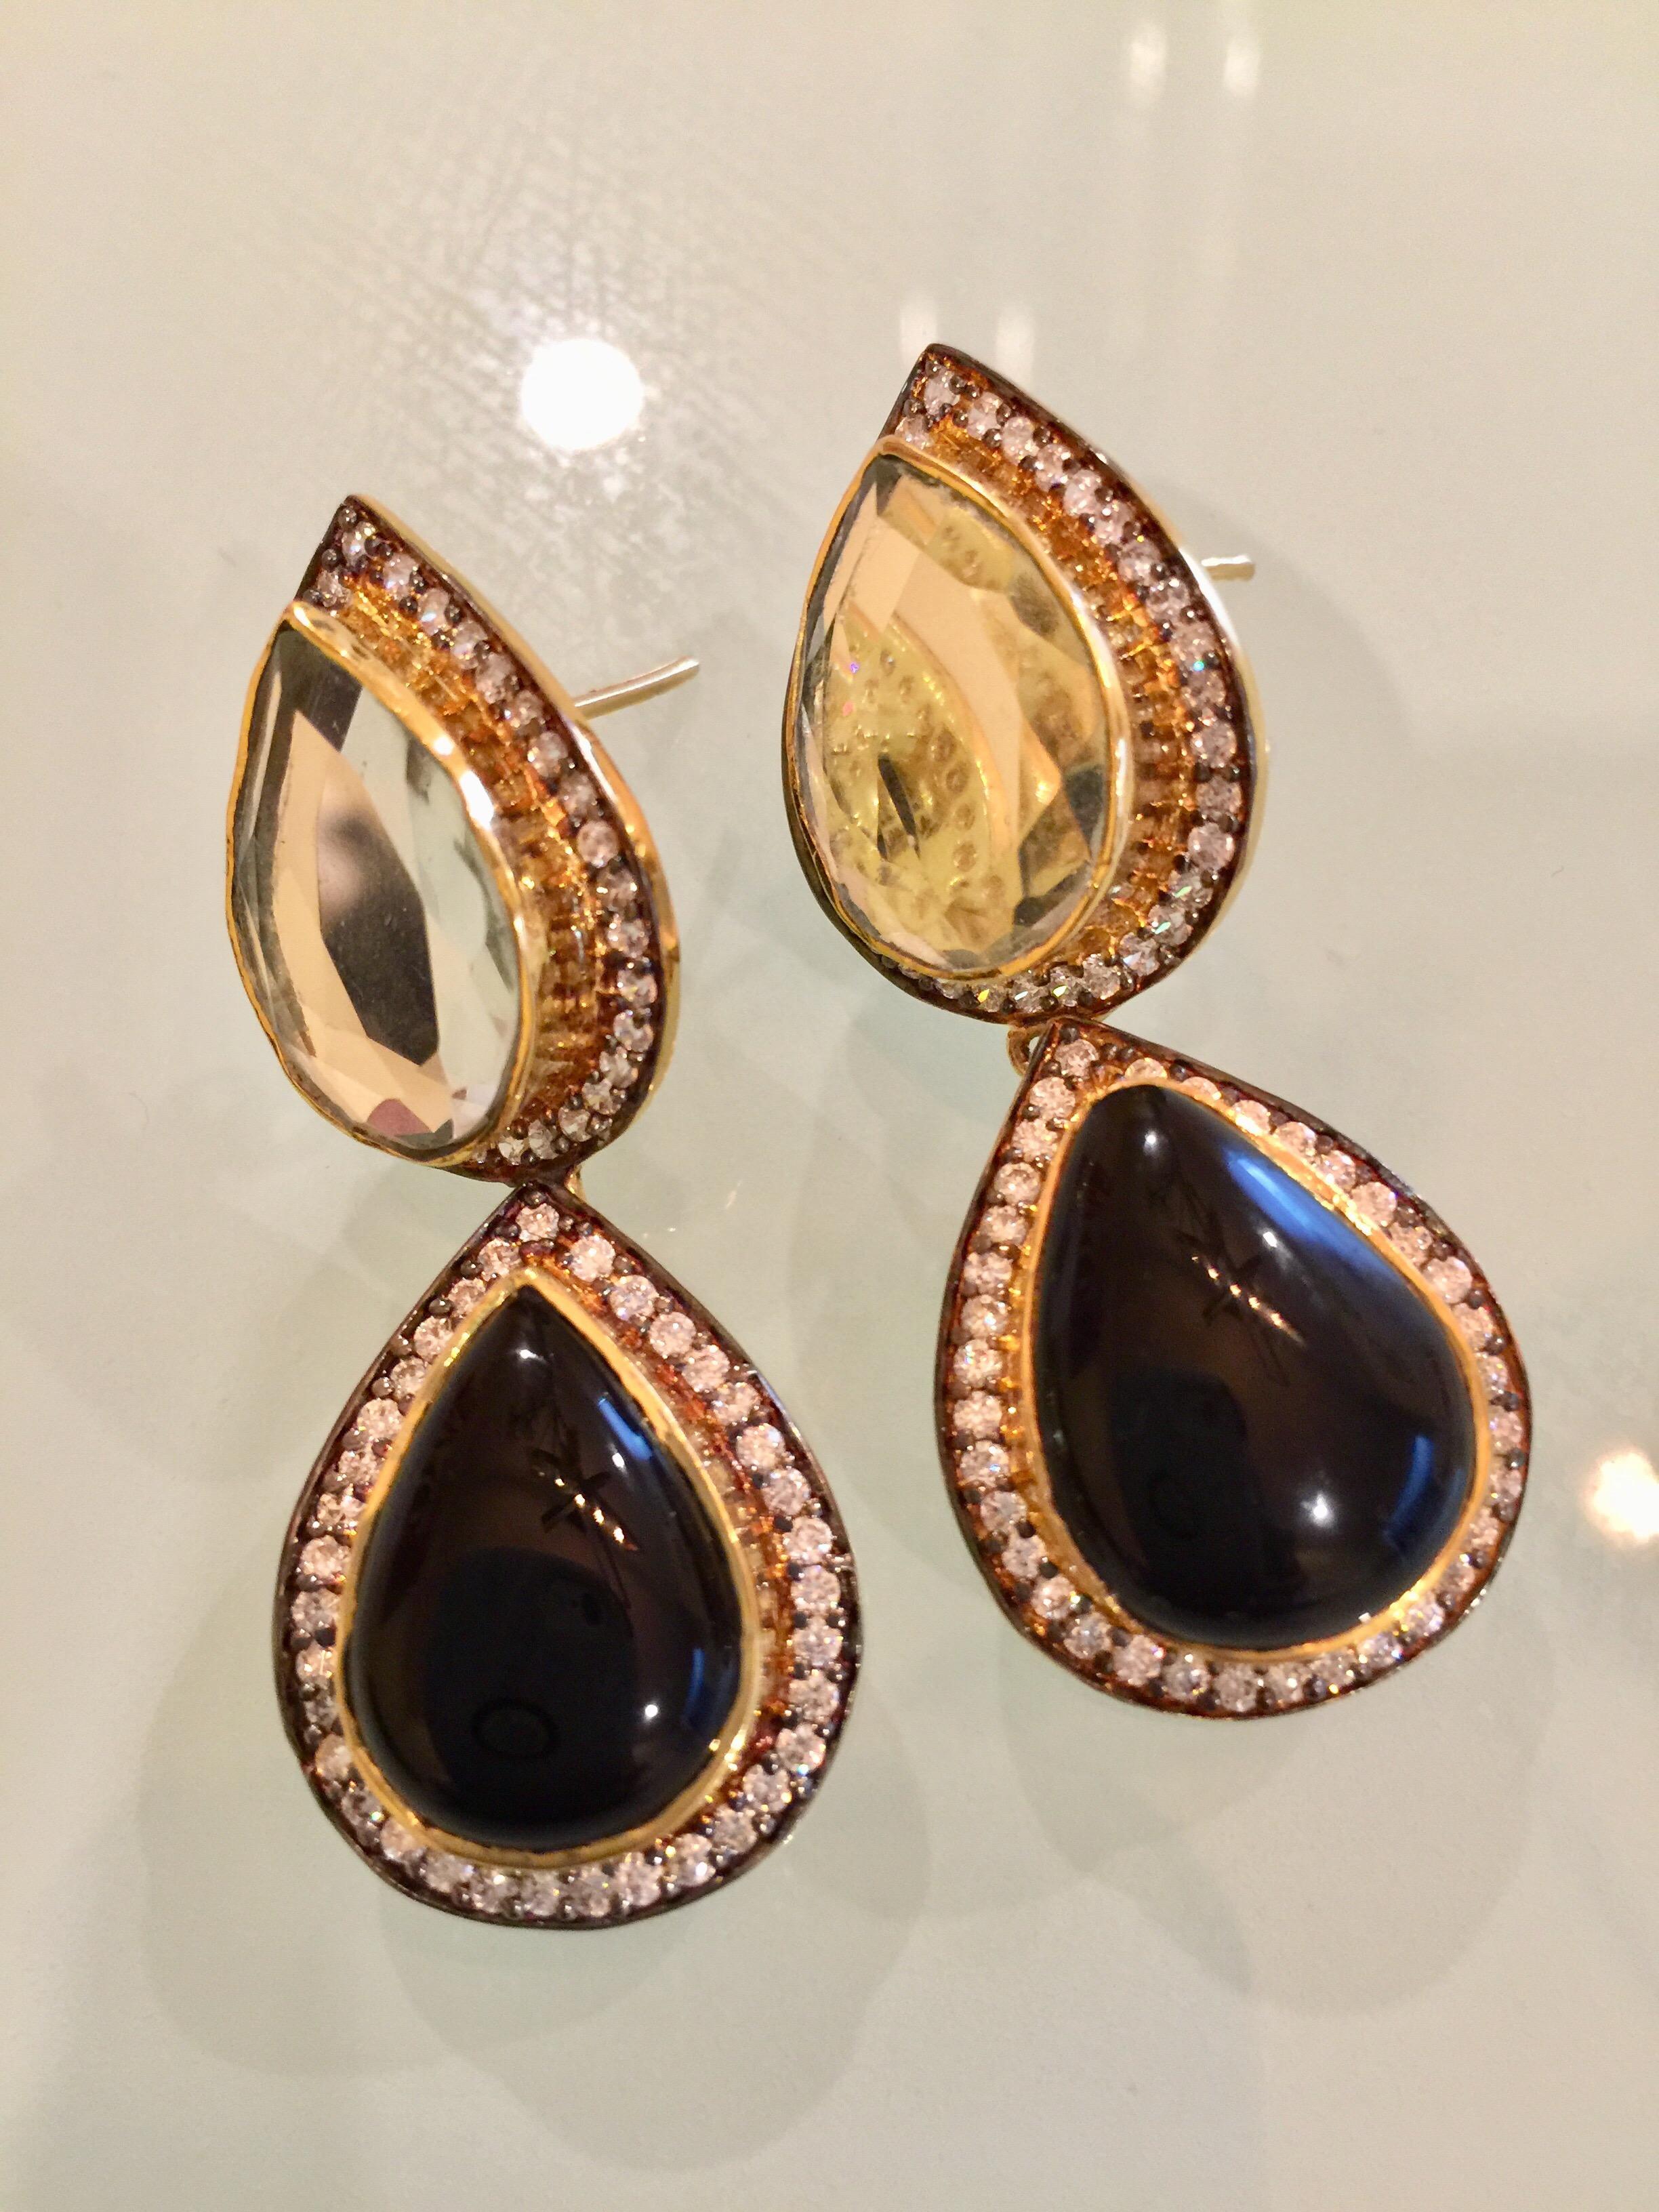 Light reflecting polki mirror stones & resin earrings is framed with sparkling cubic zircon. Earrings have a fish hook closure for pierced ears.

FOLLOW  MEGHNA JEWELS storefront to view the latest collection & exclusive pieces.  Meghna Jewels is